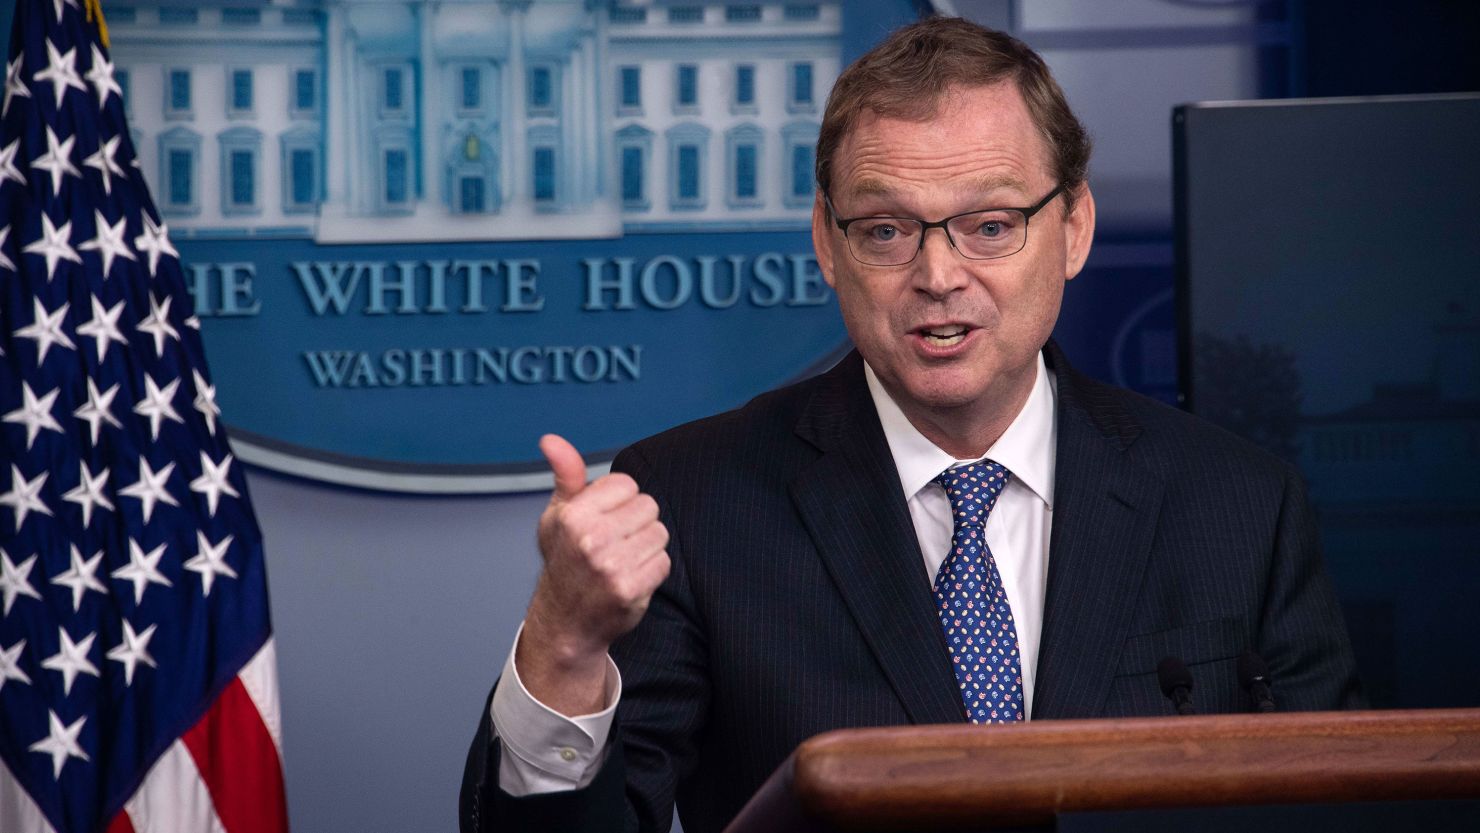 Kevin Hassett speaks during a briefing at the White House in Washington, DC, on September 10, 2018.